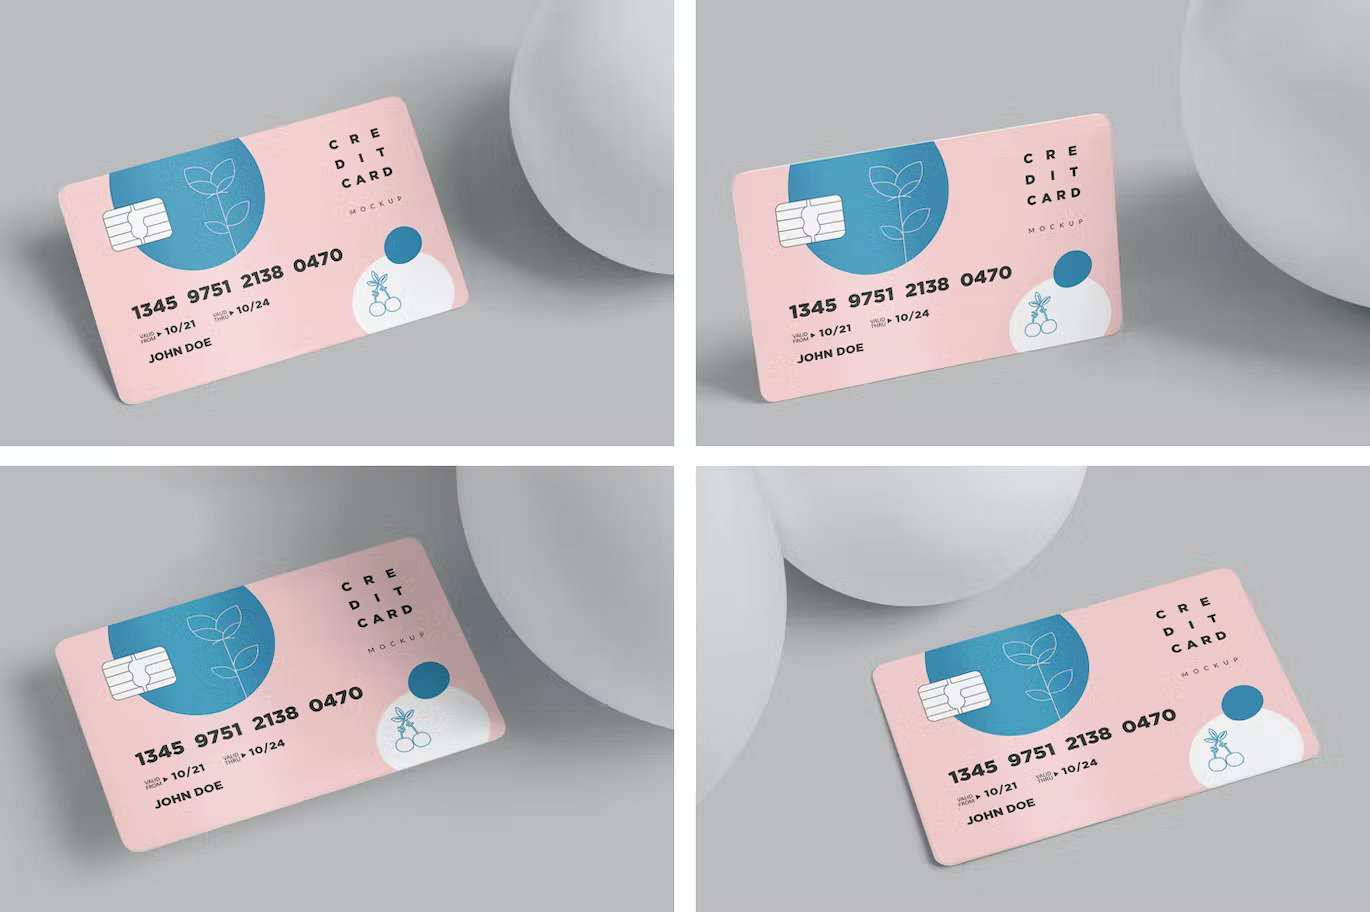 Four different credit card mockup designs